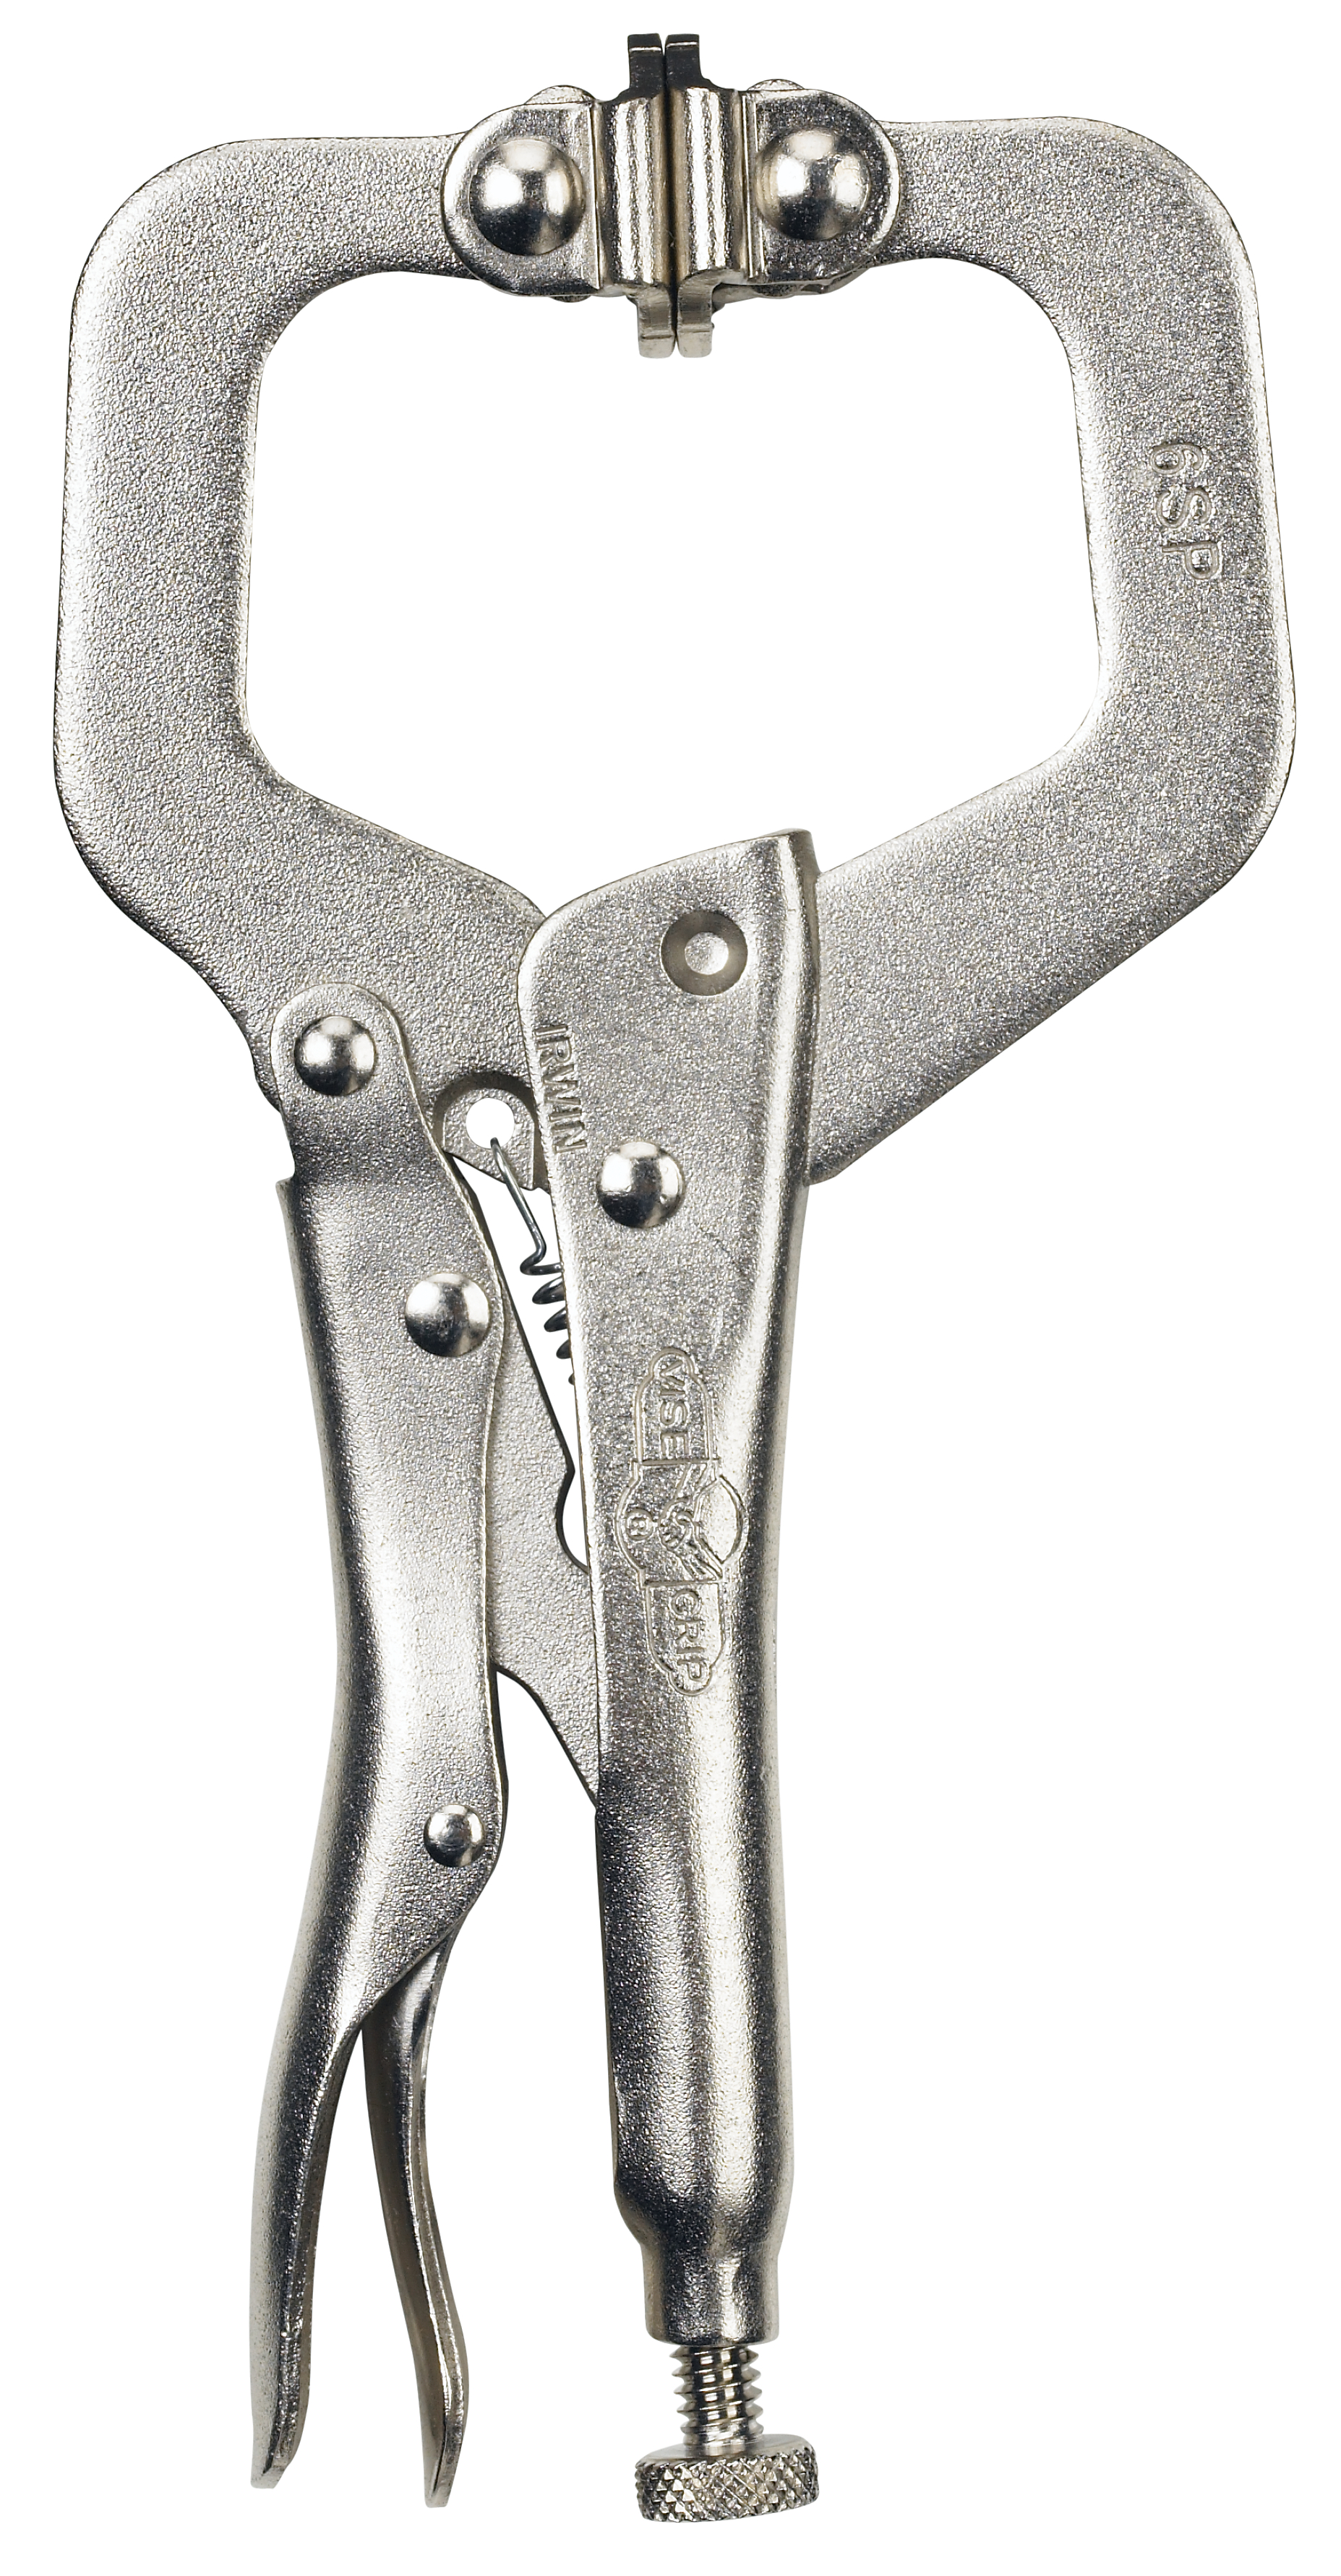 Irwin, Vise-Grip® Fast Release™ Locking Clamp With Swivel Pads, 6"